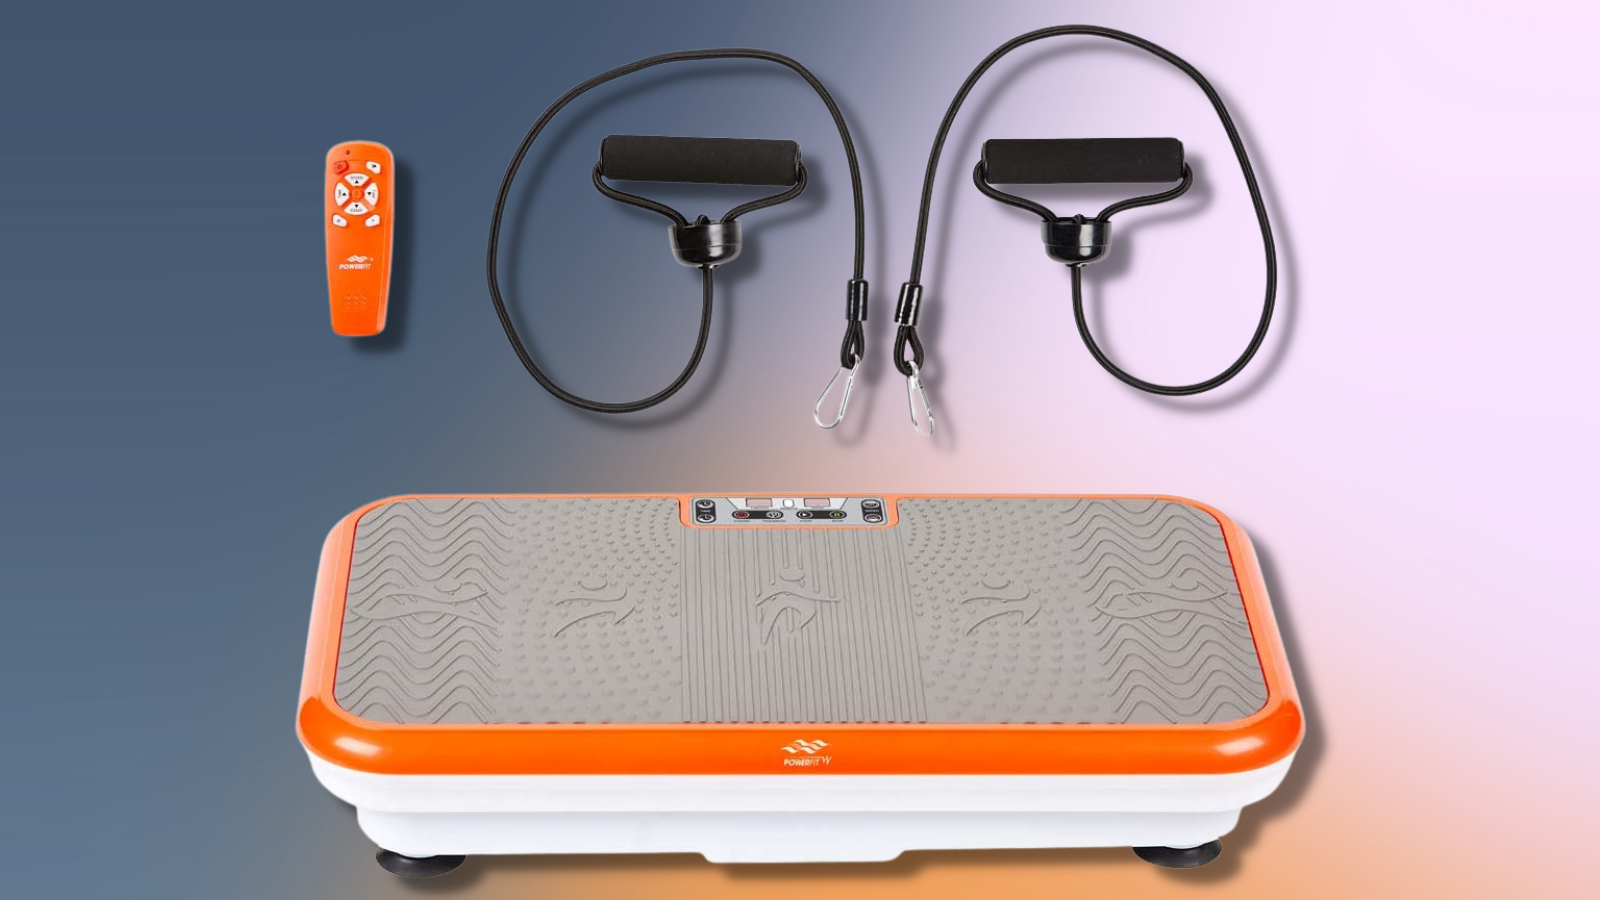 powerfit vibration platform in orange with remote and exercise bands with colorful background